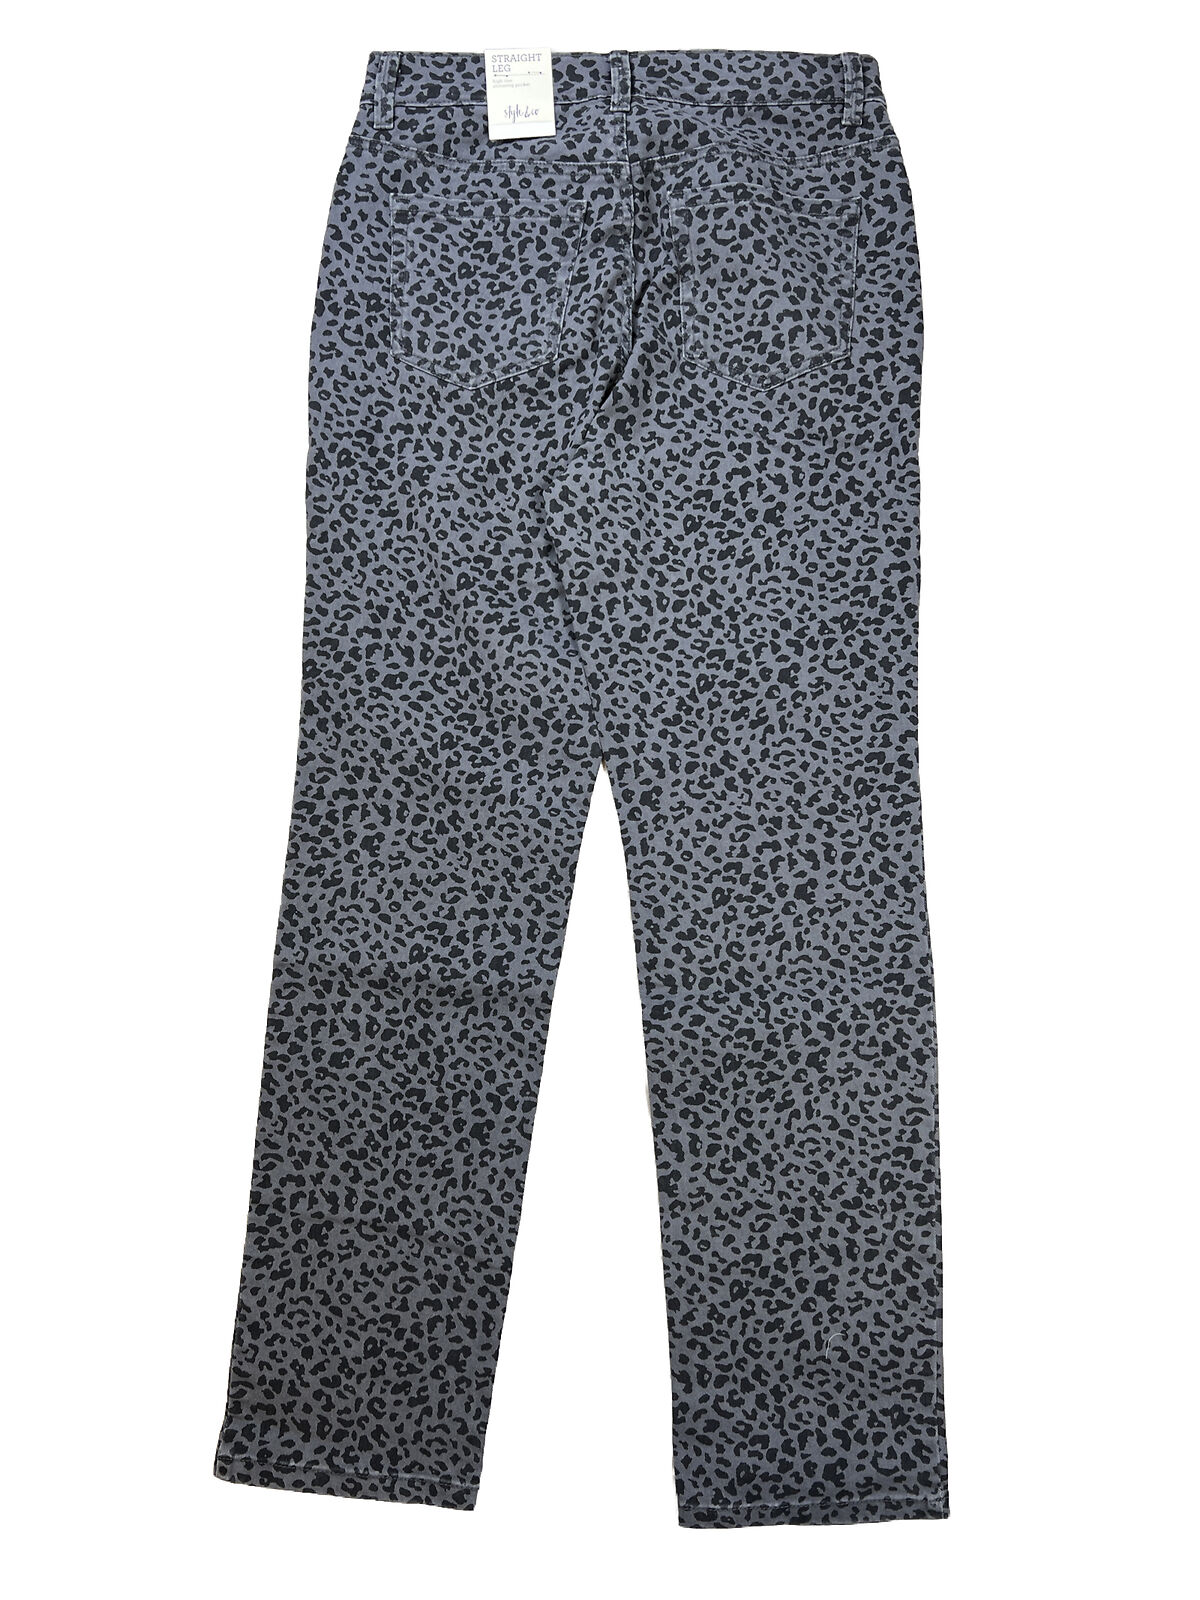 NEW Style and Co Women's Gray Cheetah Print High Rise Straight Jeans - 10